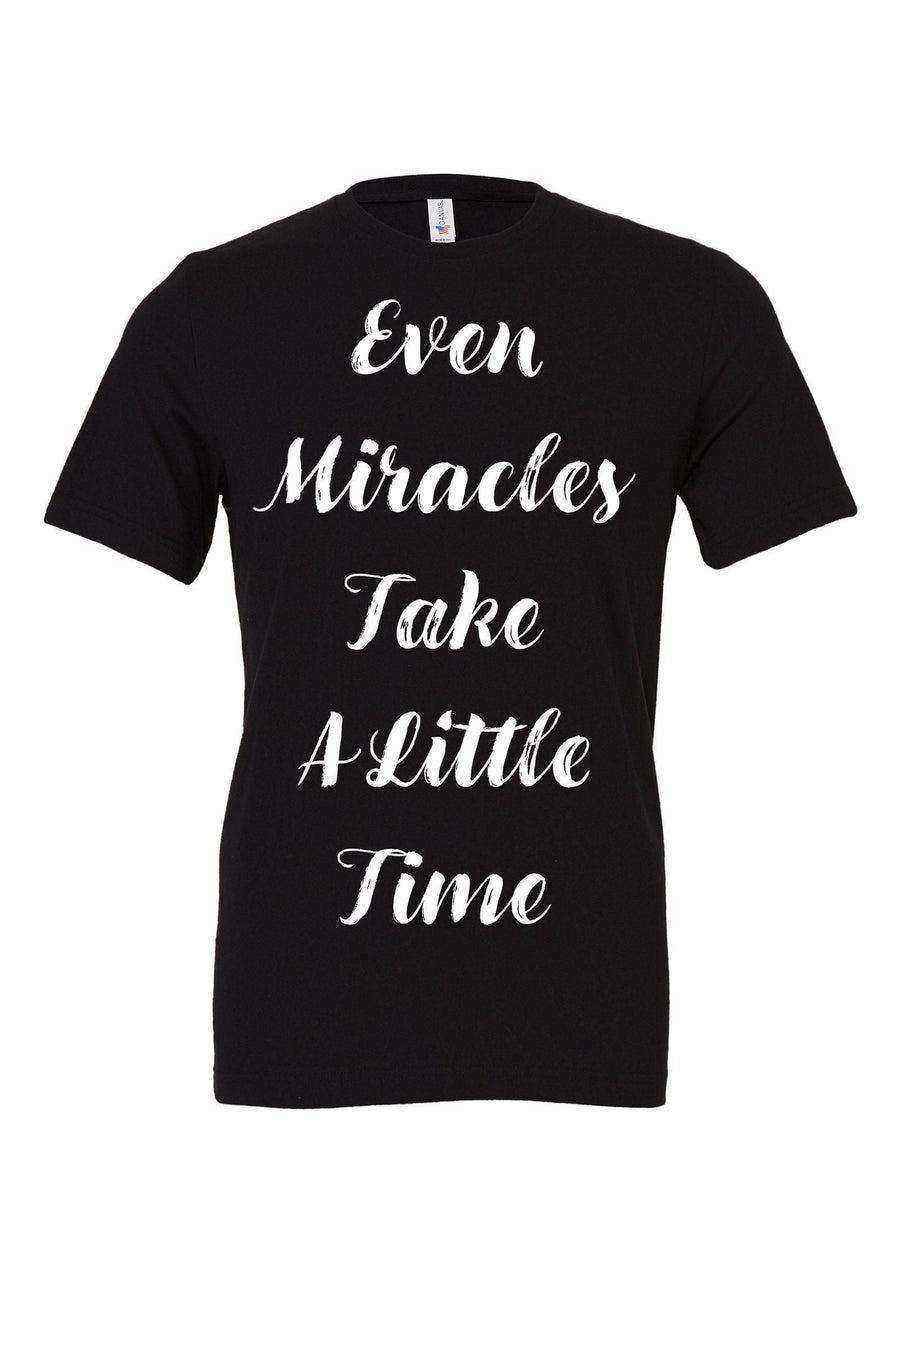 Youth | Cinderella Tee | Even Miracles Take A Little Time - Dylan's Tees